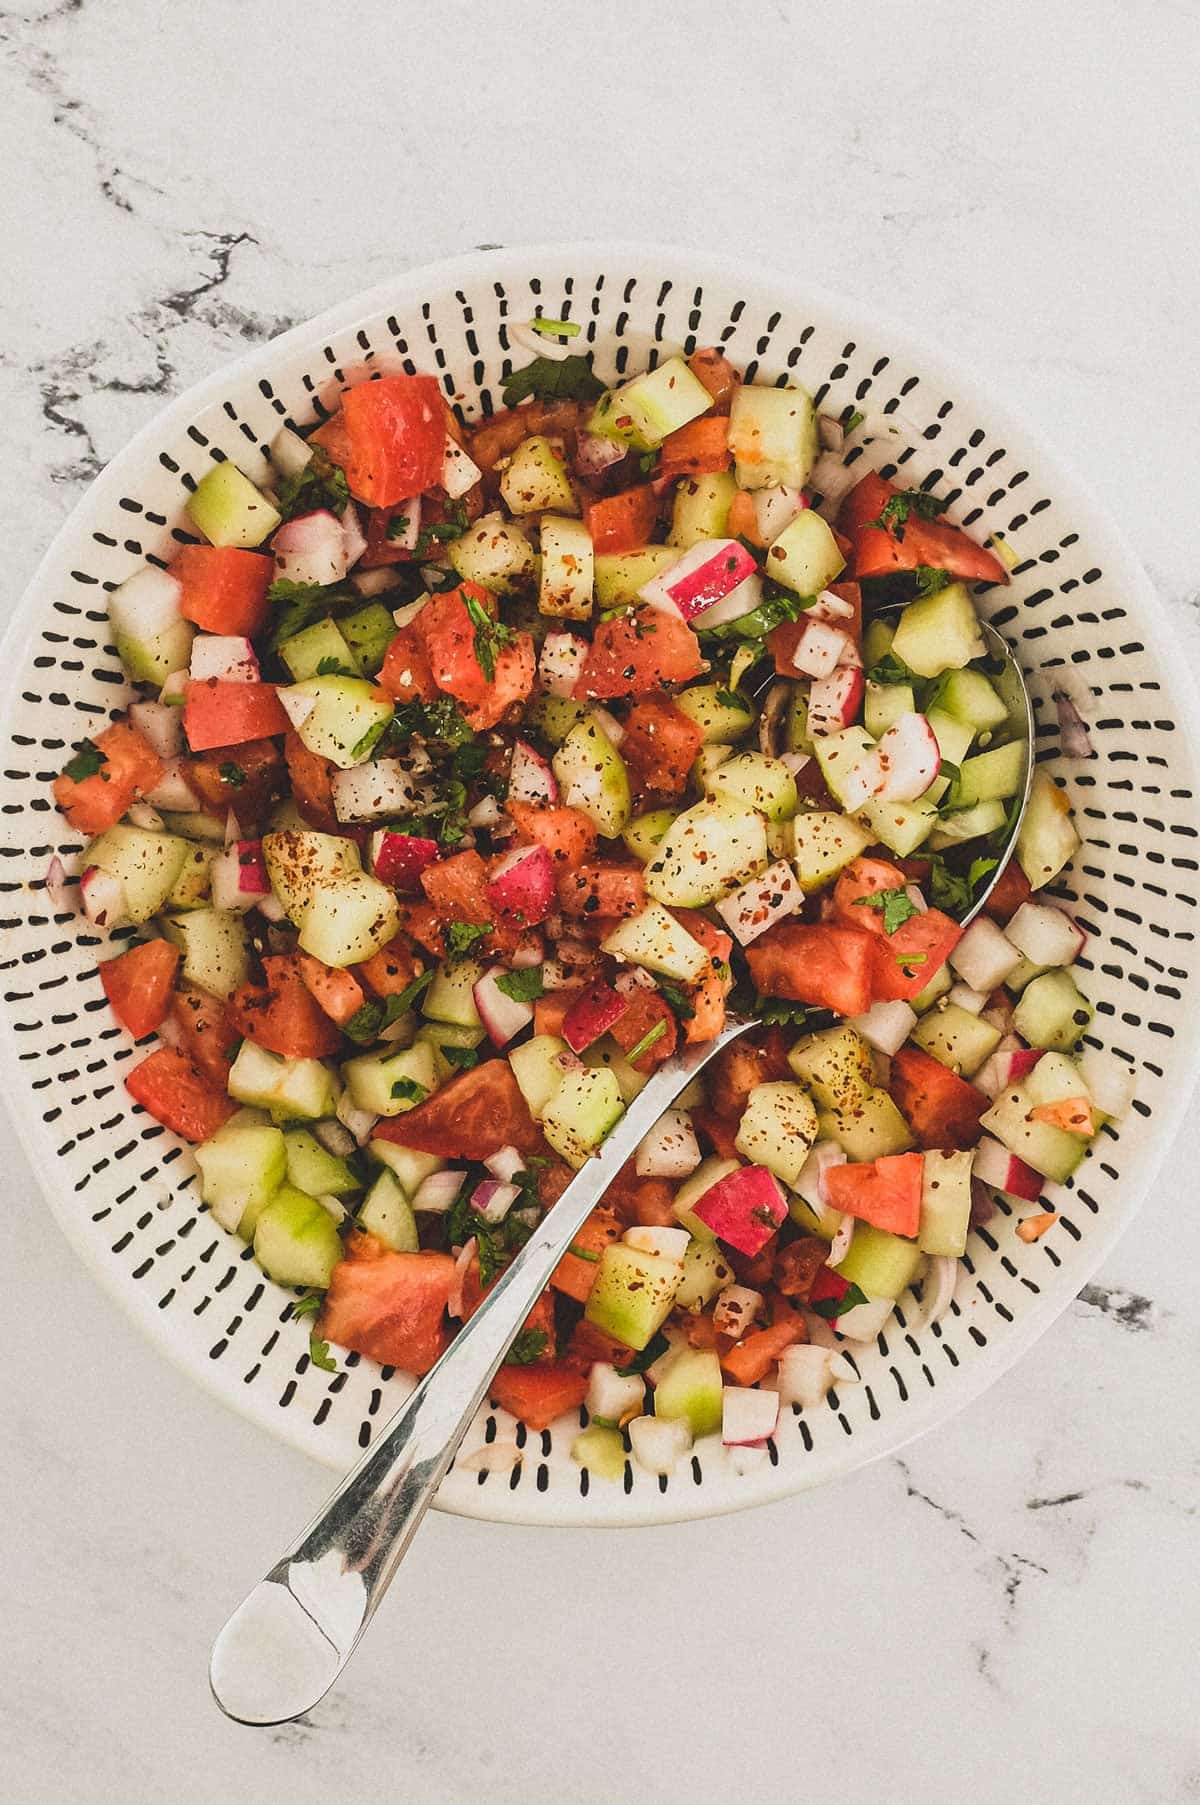 Cucumber, tomato & red onion are combined with a little cilantro and lime juice and served in a bowl as a chopped salad for Indian food.